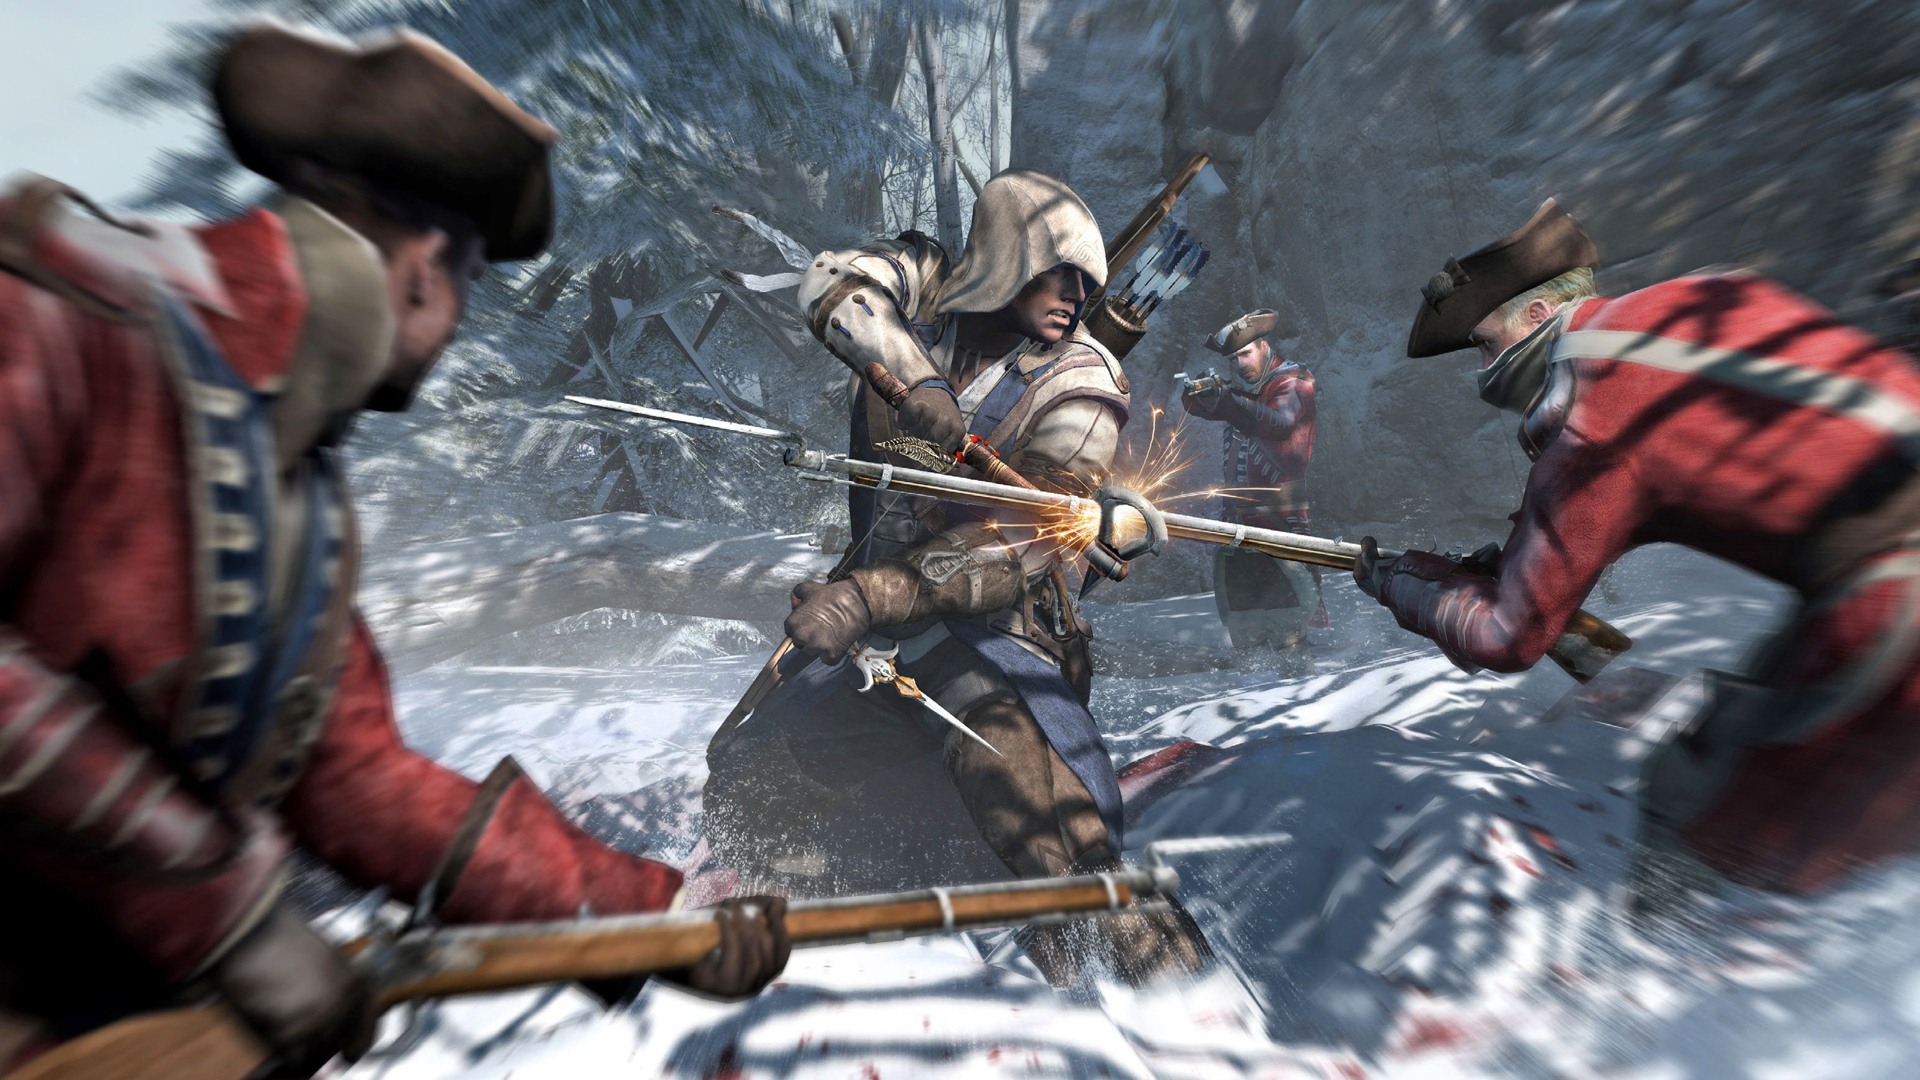 Assassin's Creed 3 HD wallpapers #8 - 1920x1080